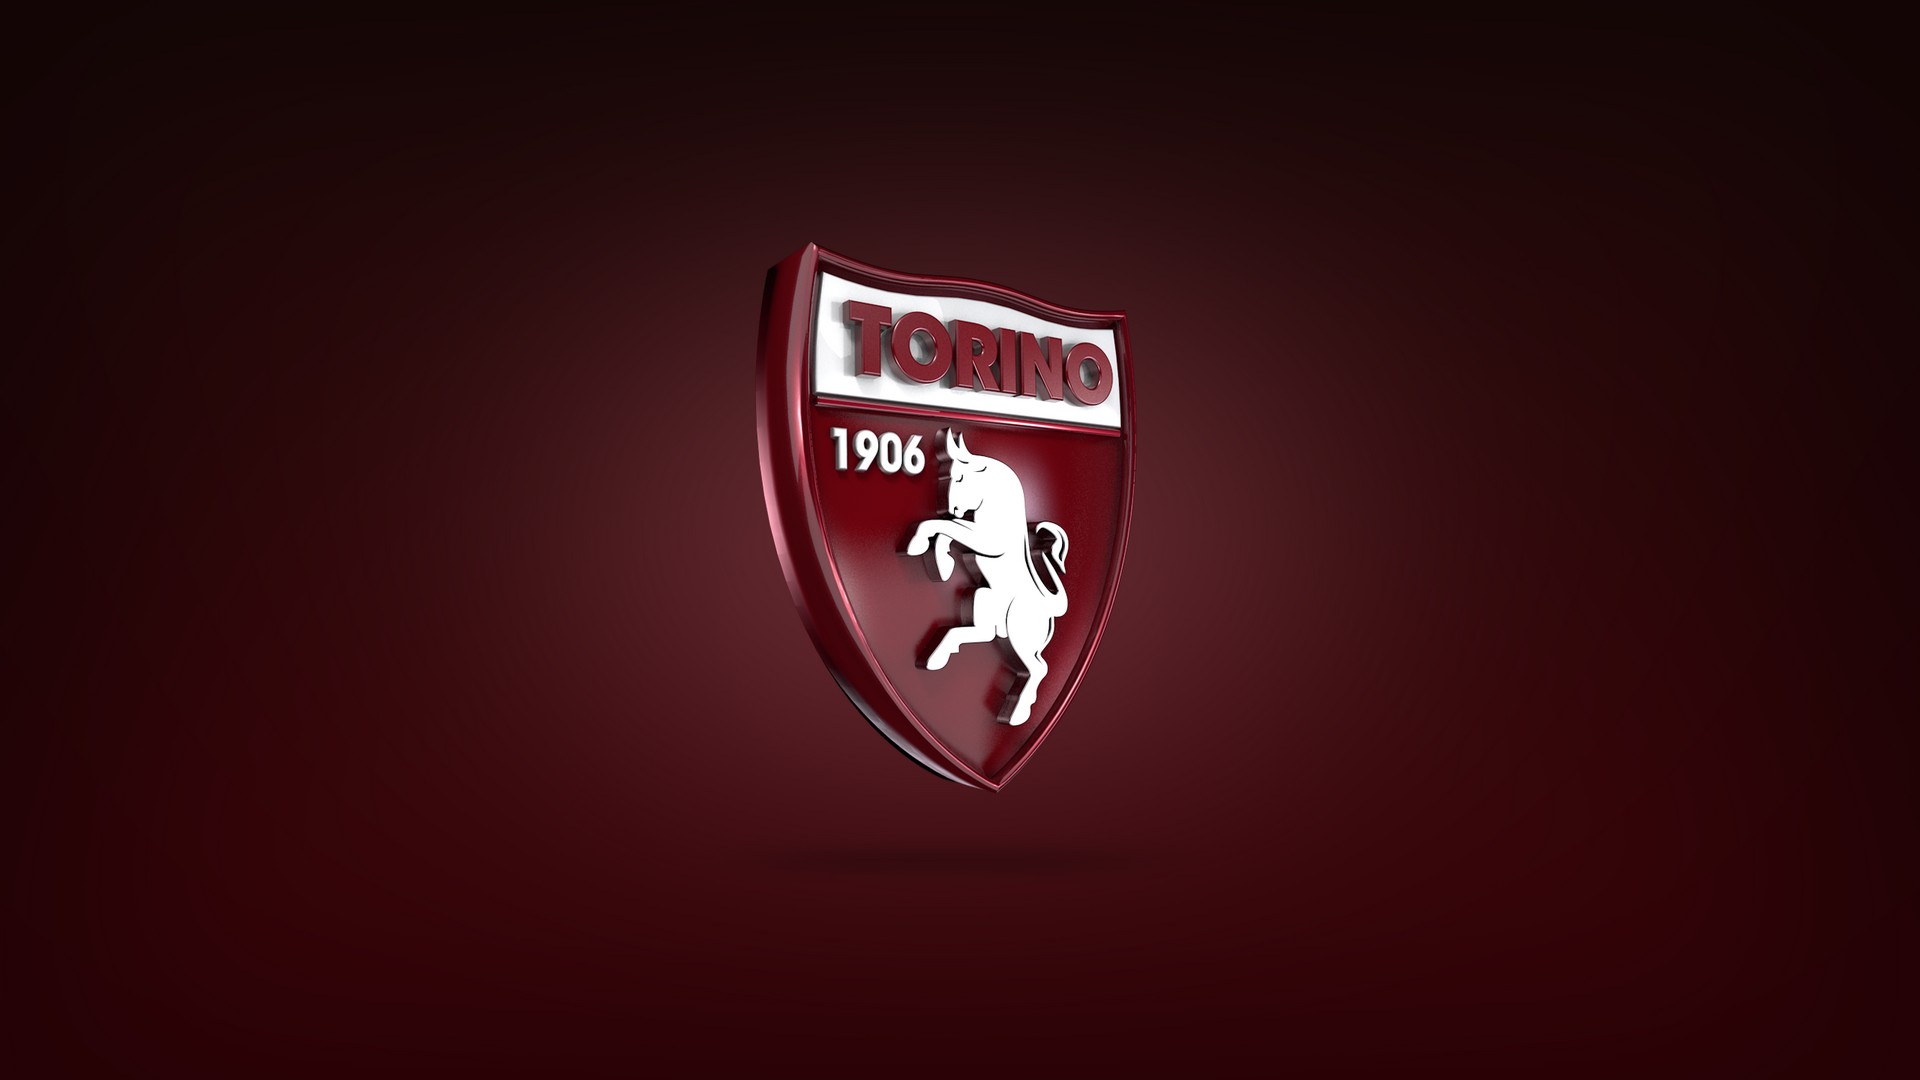 Torino FC Wallpaper HD with high-resolution 1920x1080 pixel. You can use this wallpaper for your Desktop Computers, Mac Screensavers, Windows Backgrounds, iPhone Wallpapers, Tablet or Android Lock screen and another Mobile device